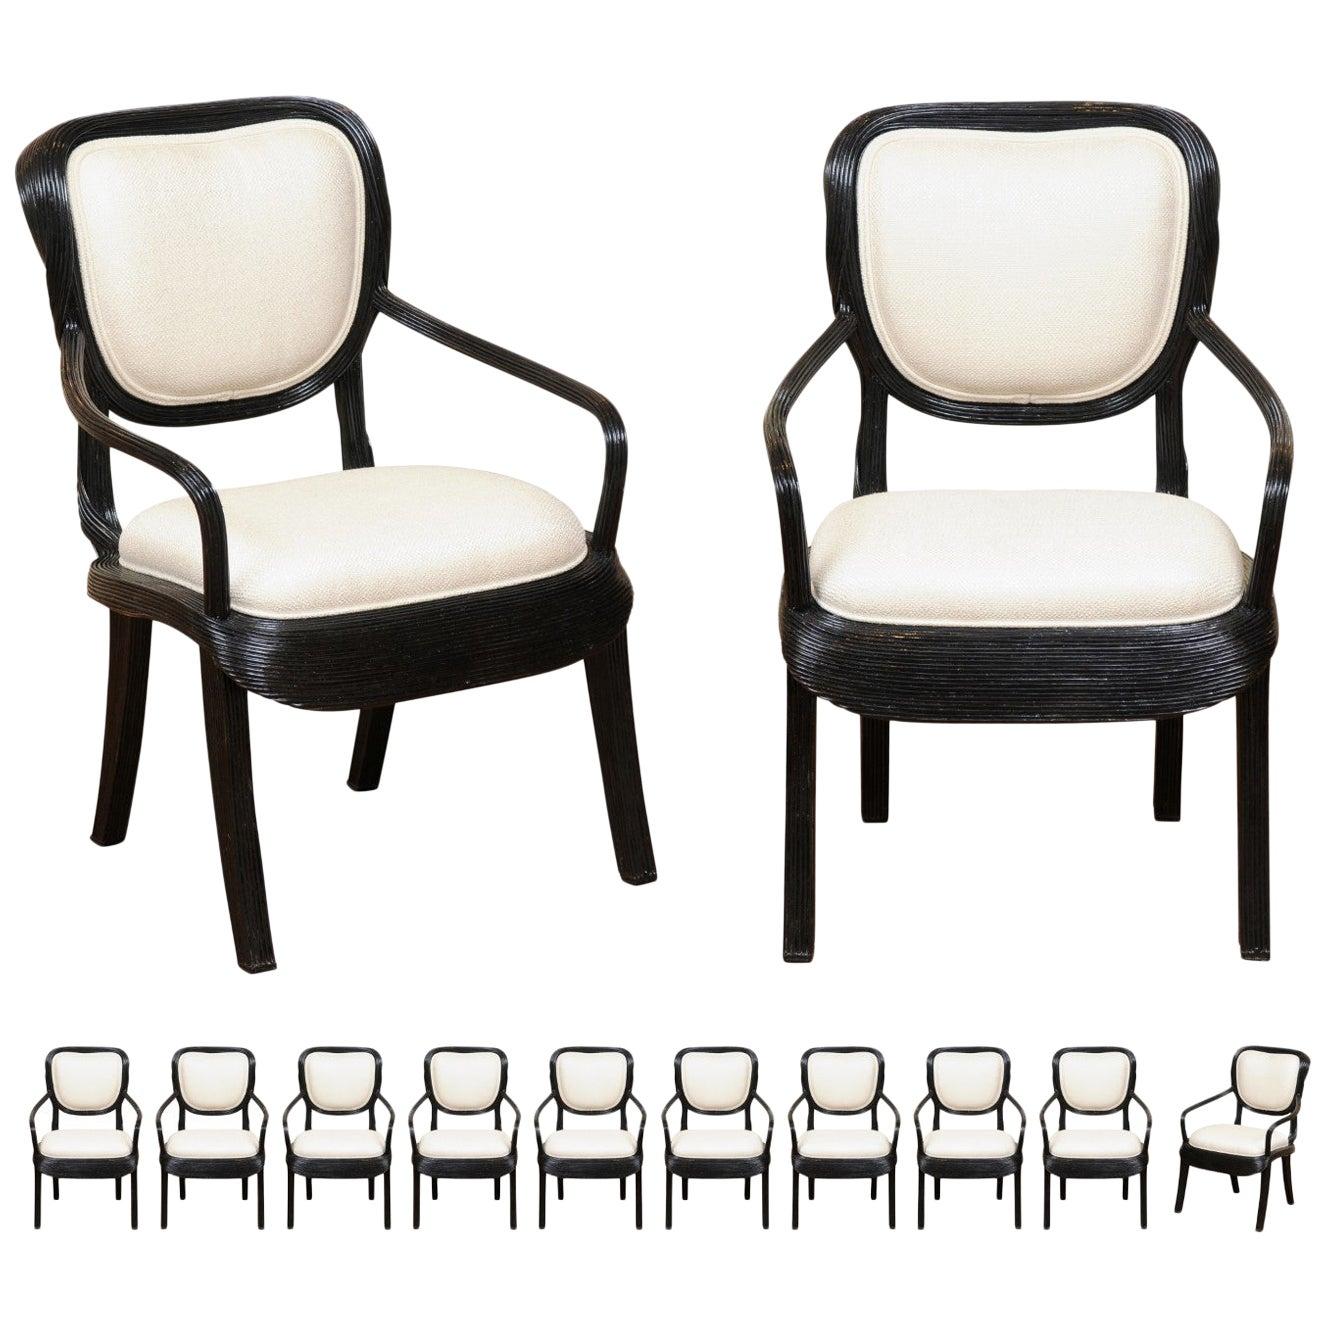 Extraordinary Set of 14 Trompe L'oiel Arm Dining Chairs by Cobonpue, circa 1980 For Sale